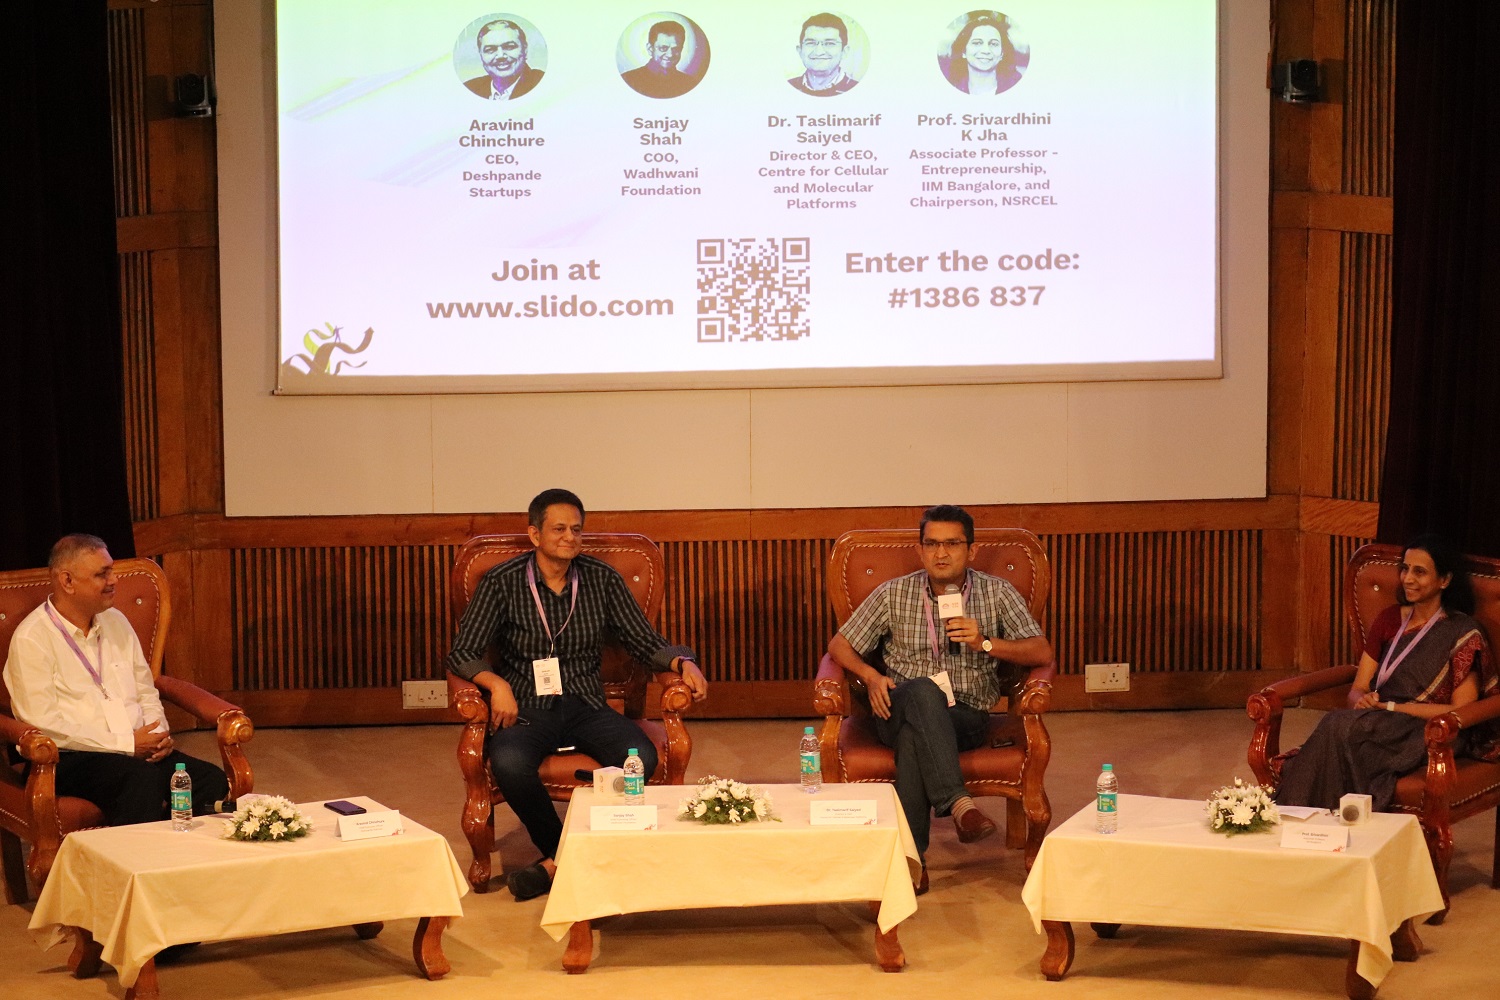 Dr. Aravind Chinchure, CEO, Deshpande Startups; Sanjay Shah, COO, Wadhwani Foundation; Dr. Taslimarif Saiyed, Director & CEO, Centre for Cellular and Molecular Platforms (C-CAMP) and Prof. Srivardhini K Jha, Chairperson, NSRCEL, at the panel discussion on ‘Building sophisticated ecosystems’.